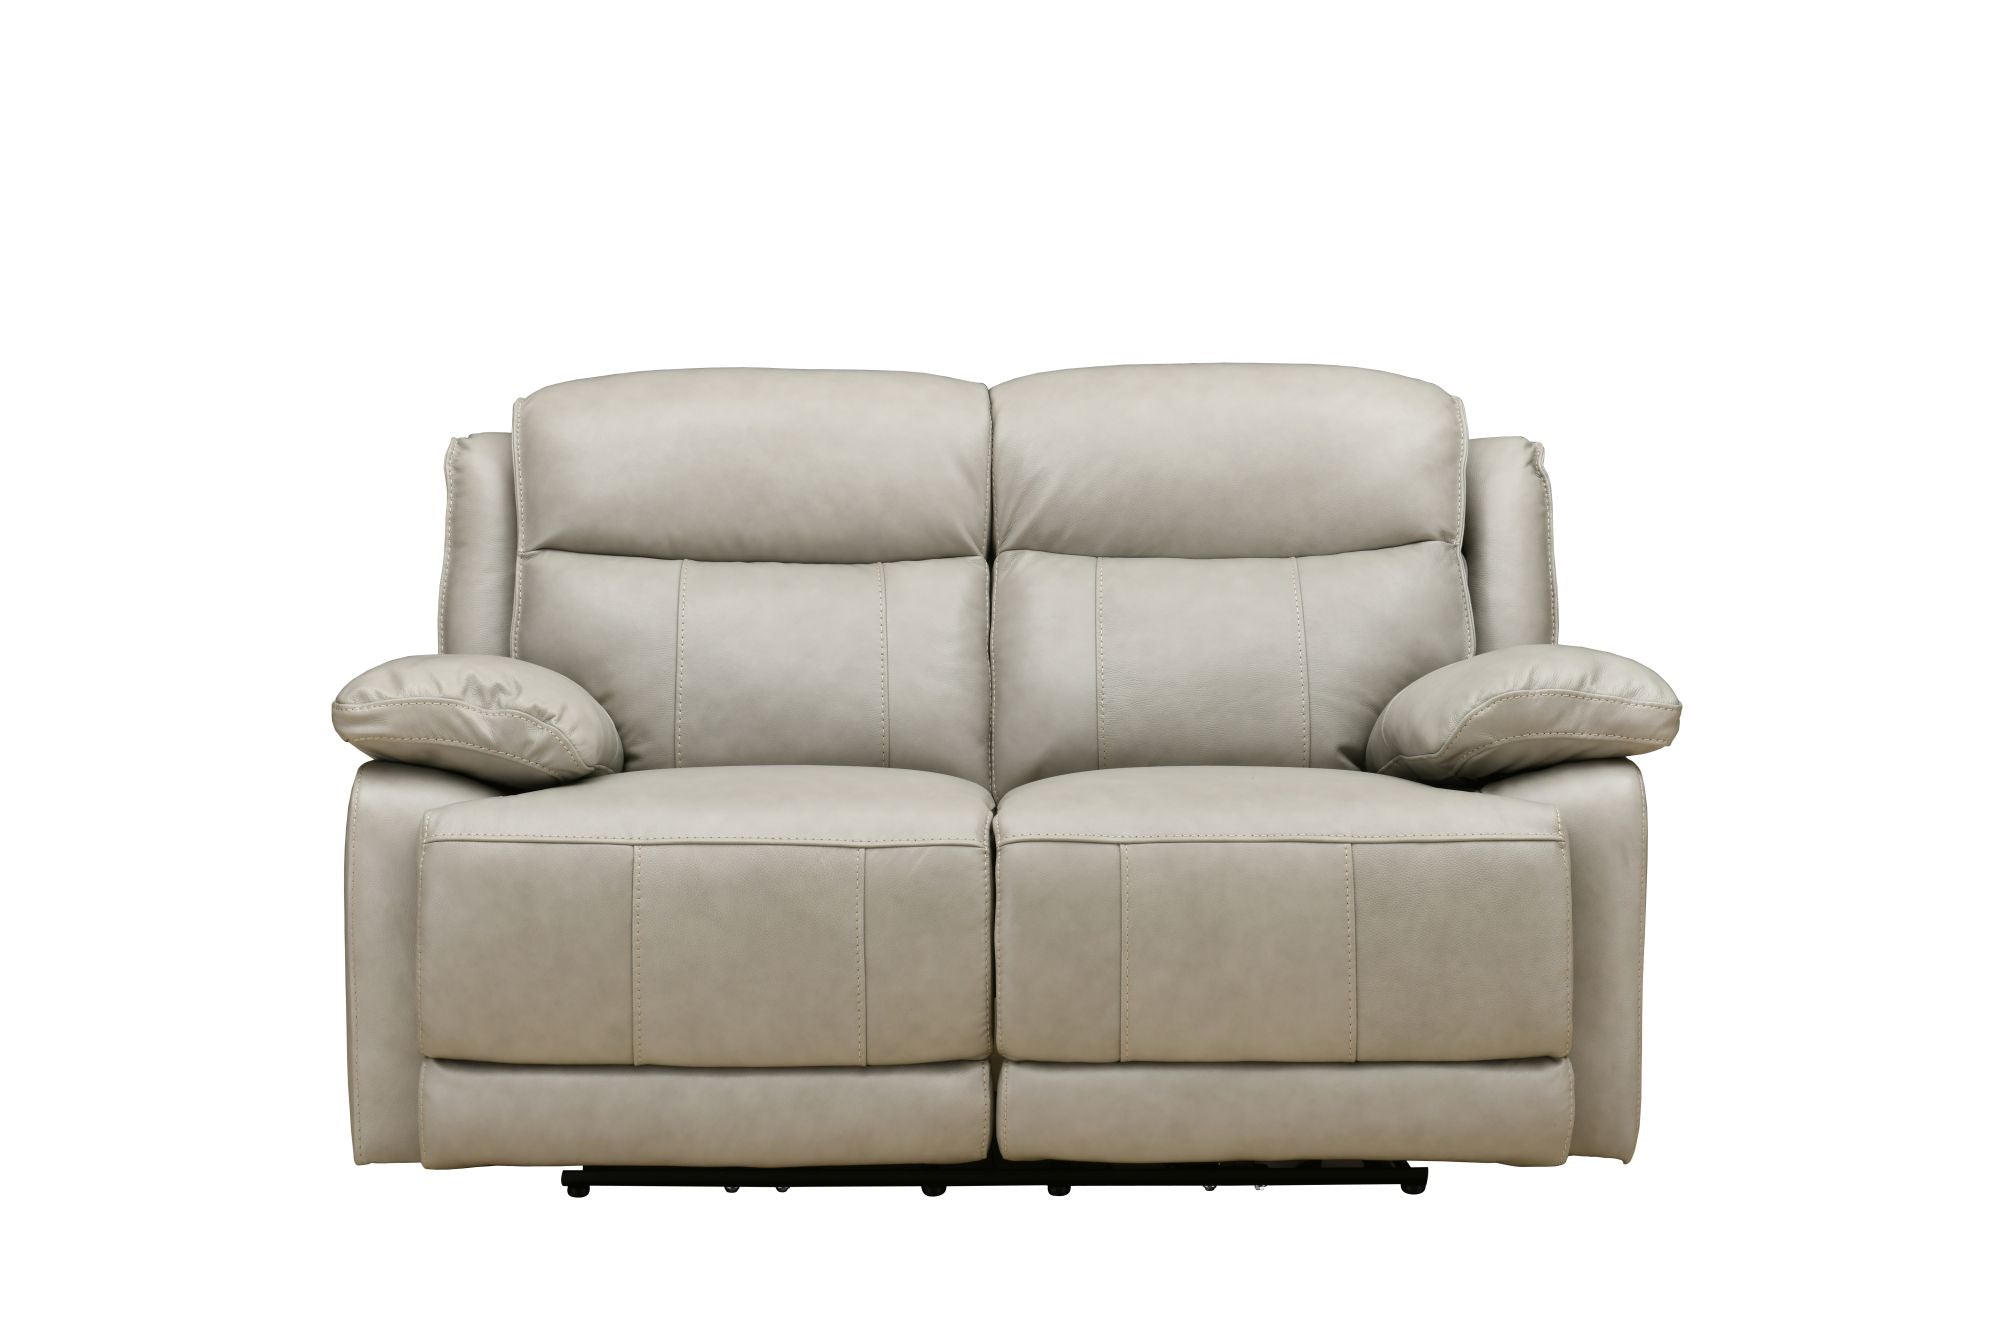 Montana 2 Seater Sofa with Recliners in Light Grey Leather